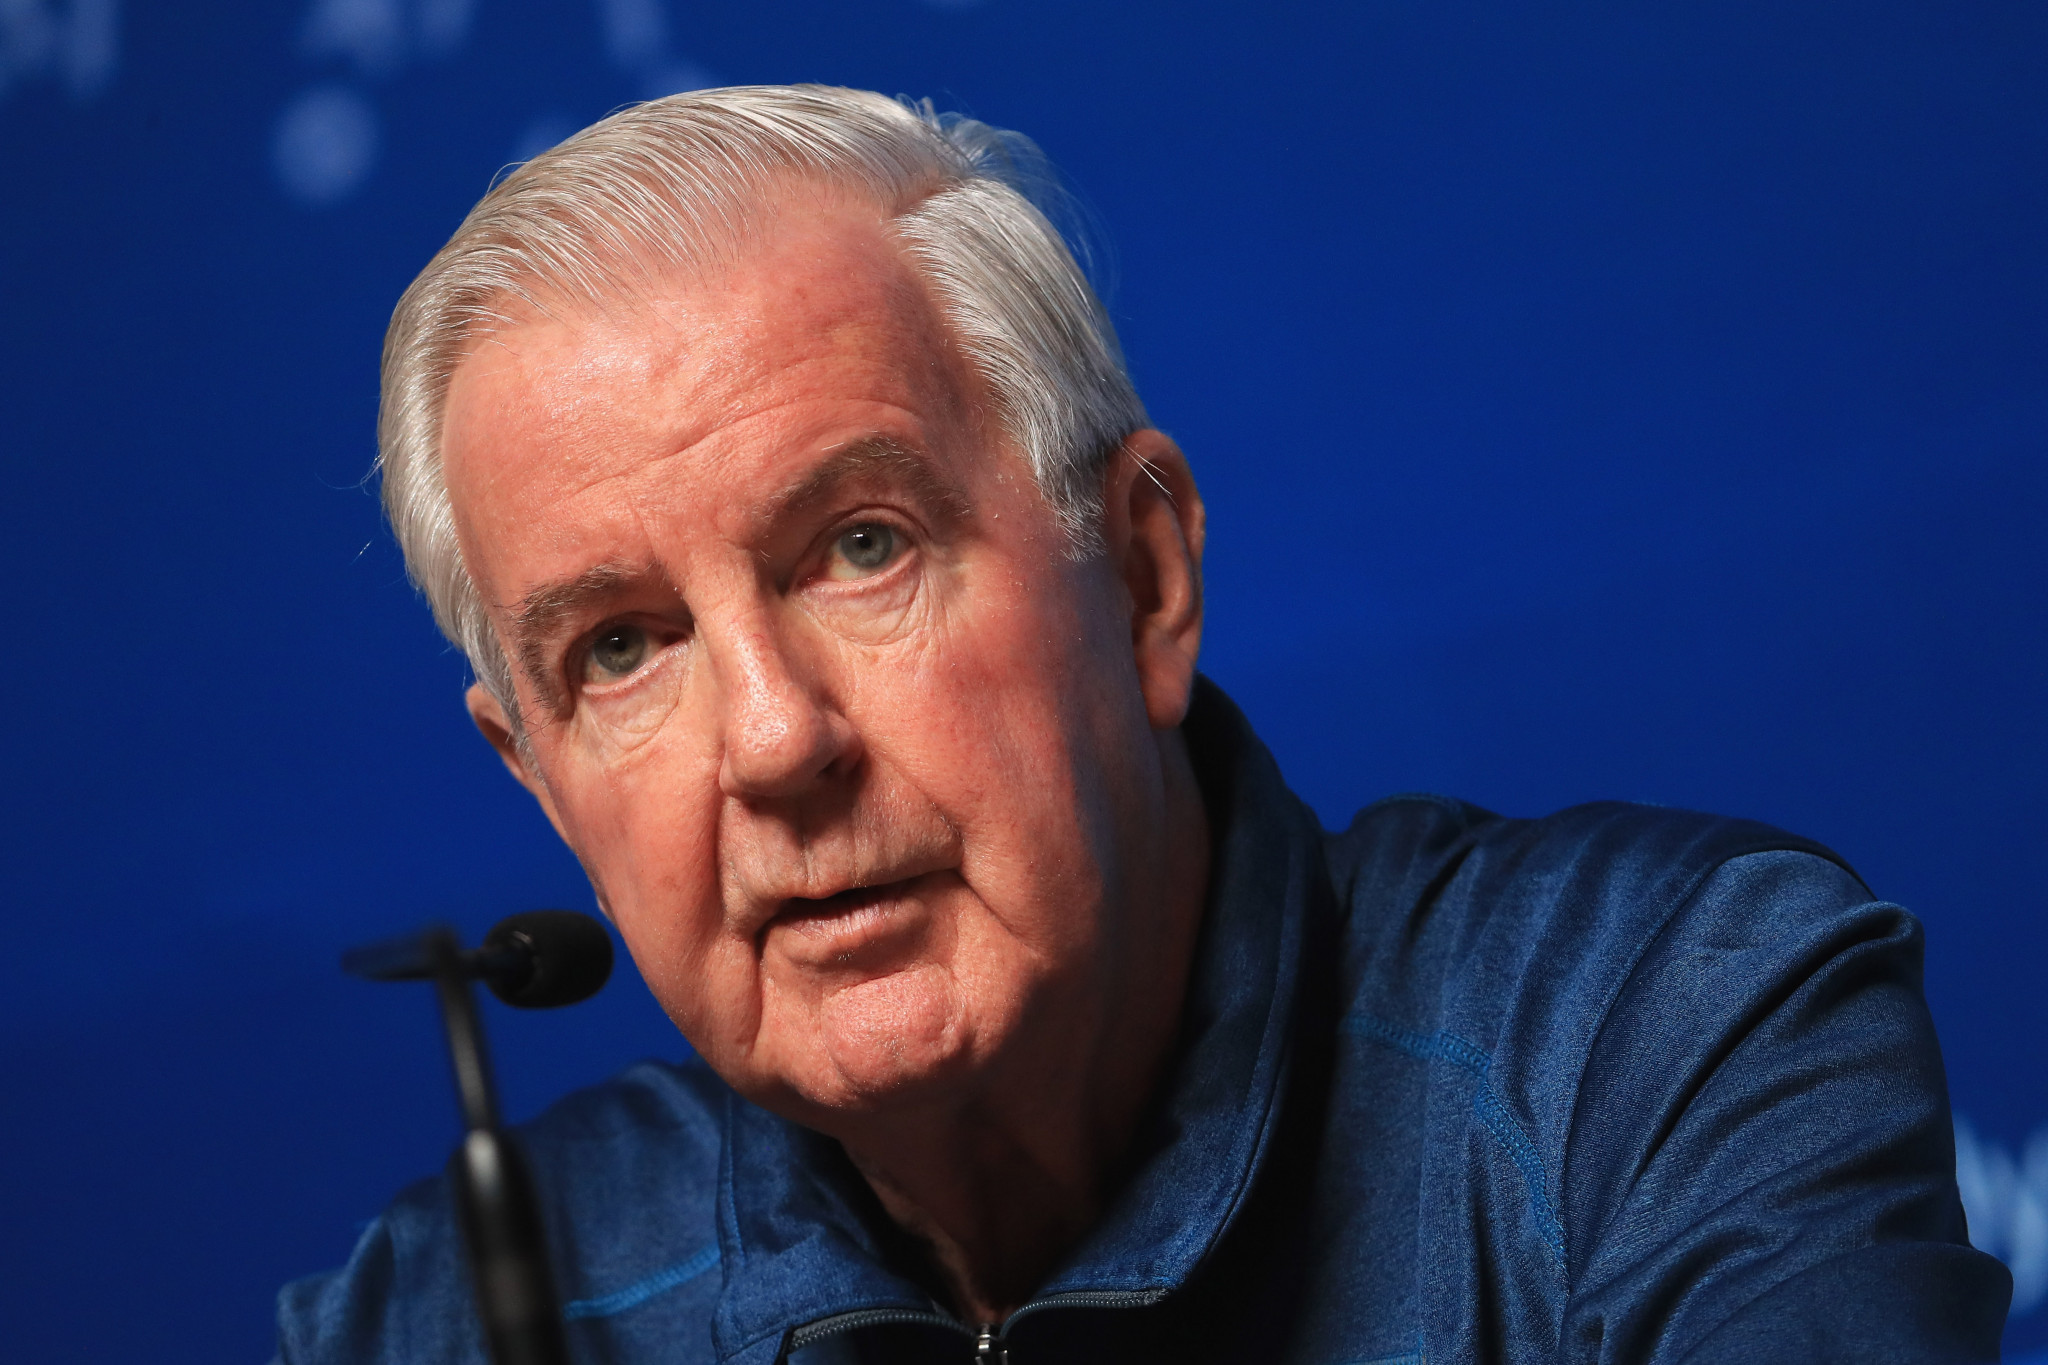 WADA President Sir Craig Reedie reiterated this week that two criteria must be met for RUSADA to be made compliant ©Getty Images